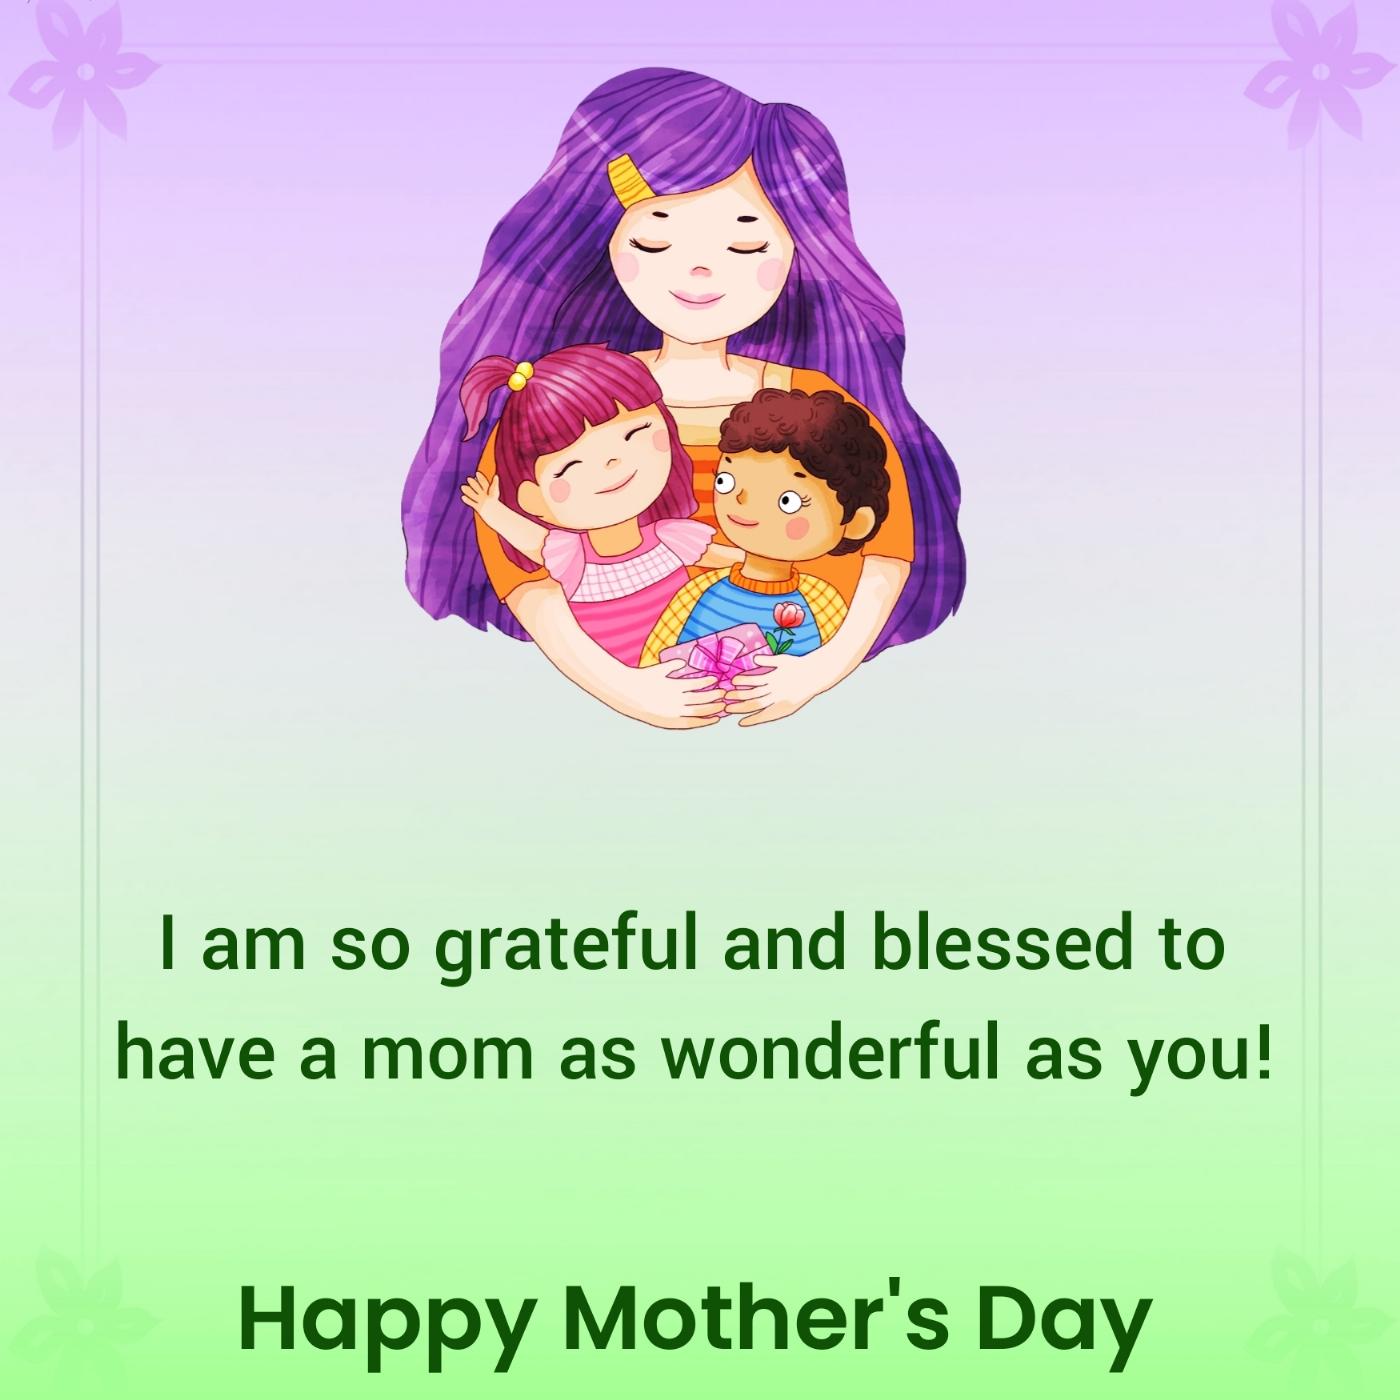 am so grateful and blessed to have a mom